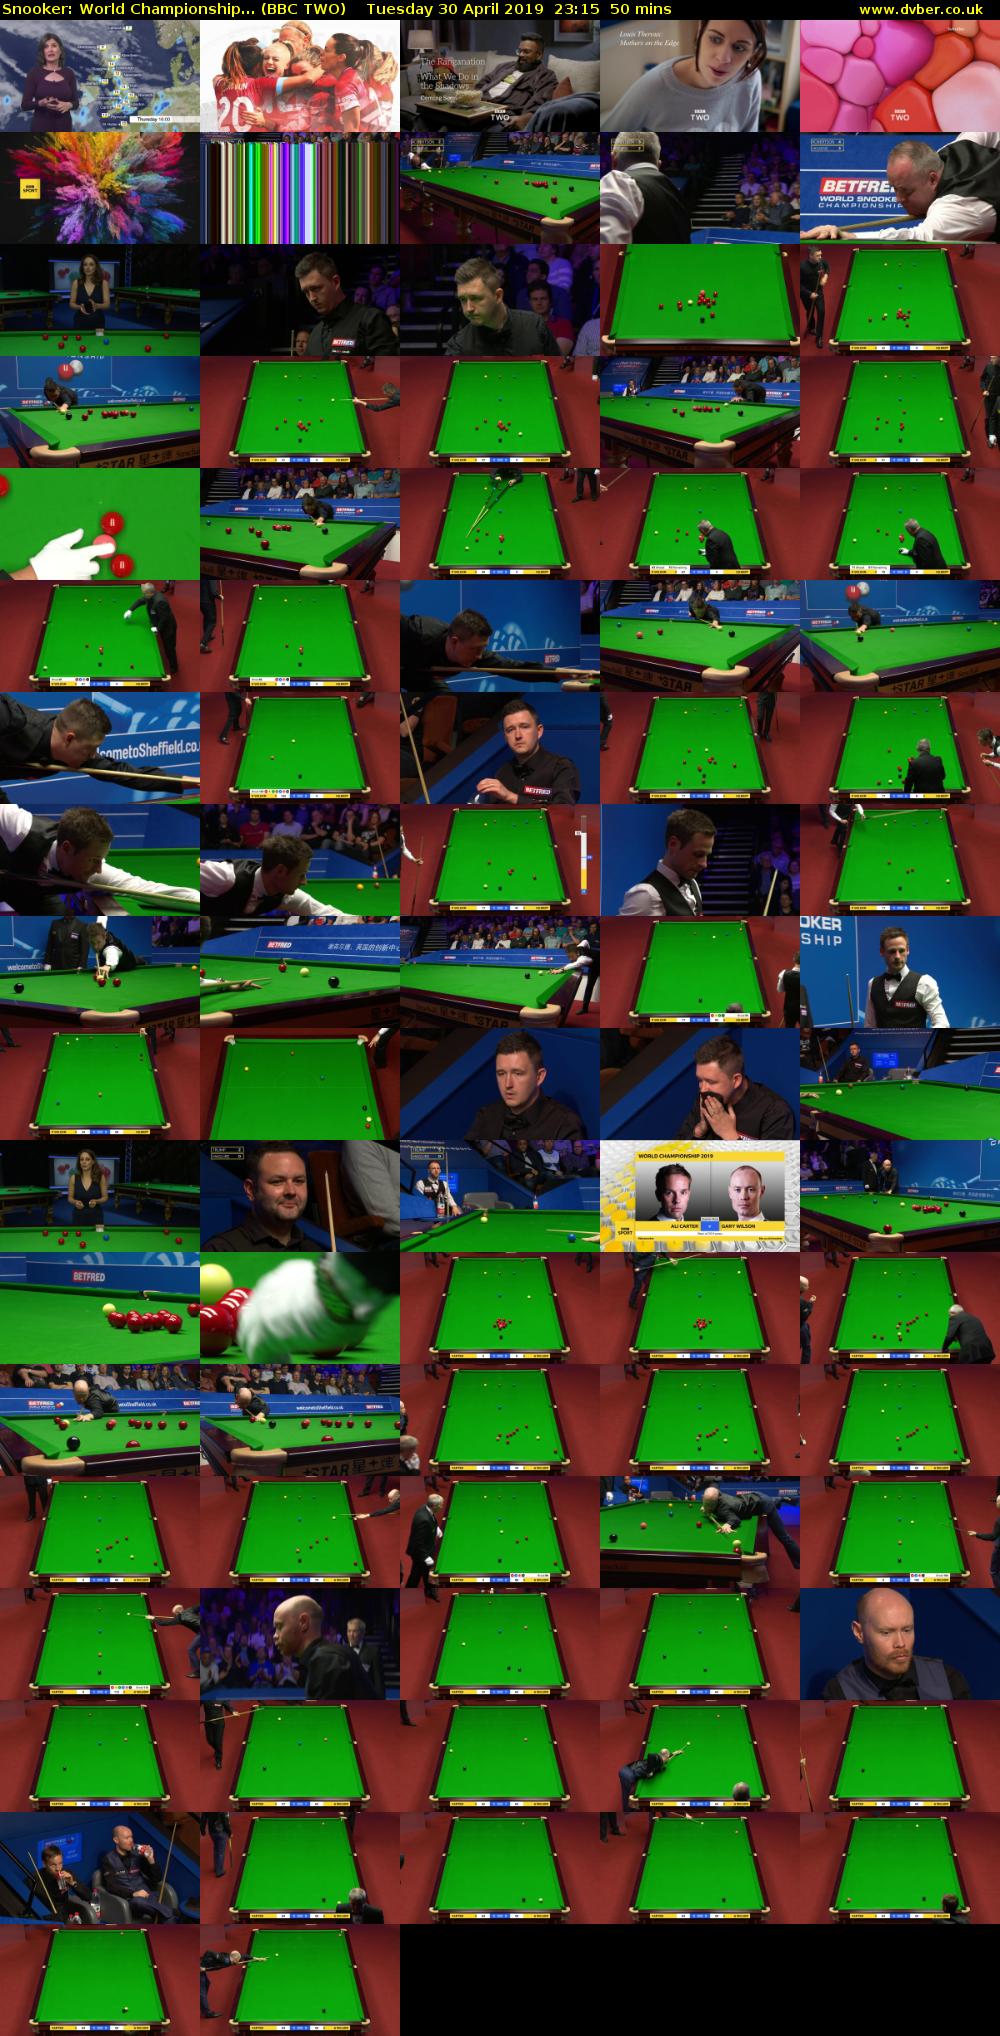 Snooker: World Championship... (BBC TWO) Tuesday 30 April 2019 23:15 - 00:05